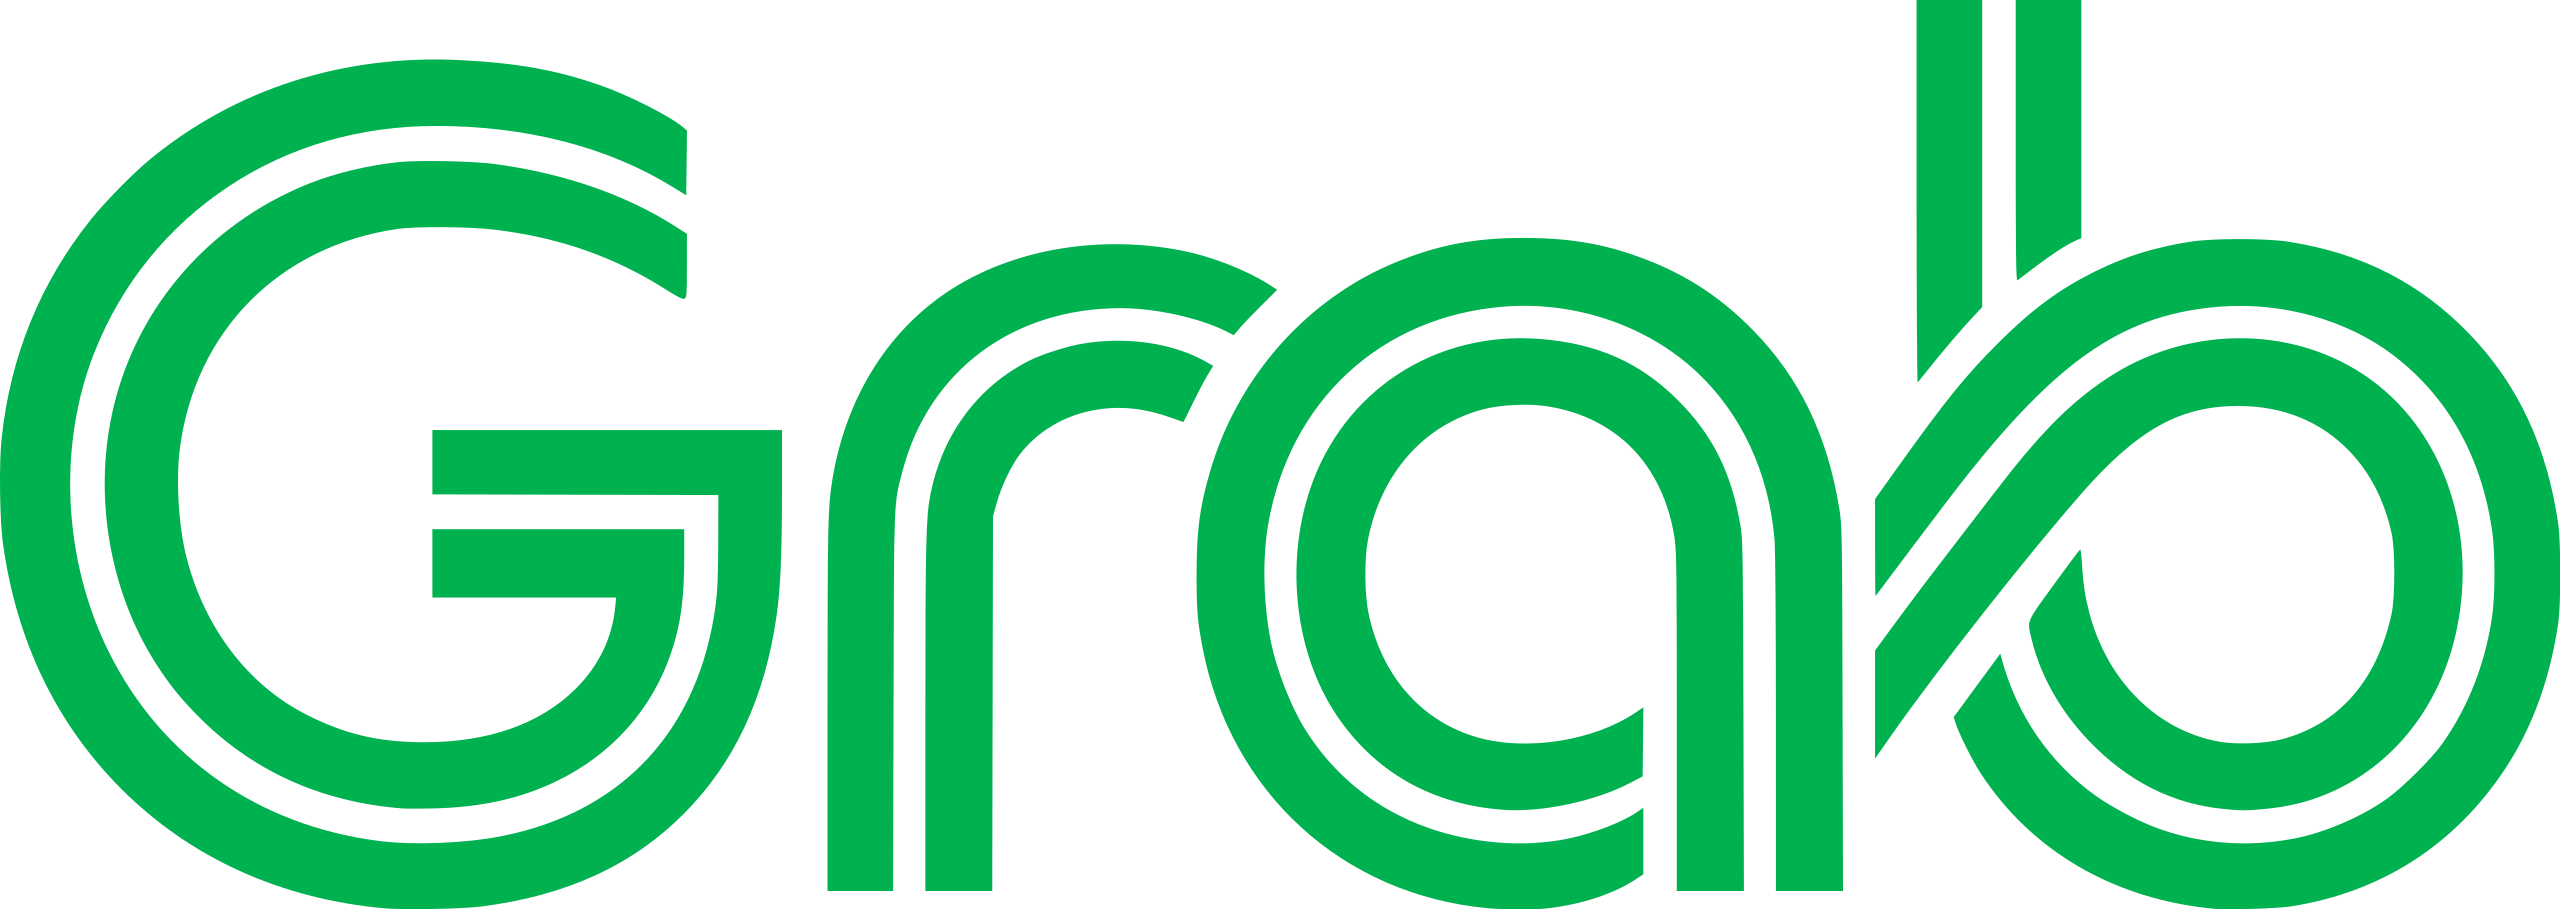 Grab is a brand associated with a speaker at the Cyber Summit Singapore, organised by Forefront Events.